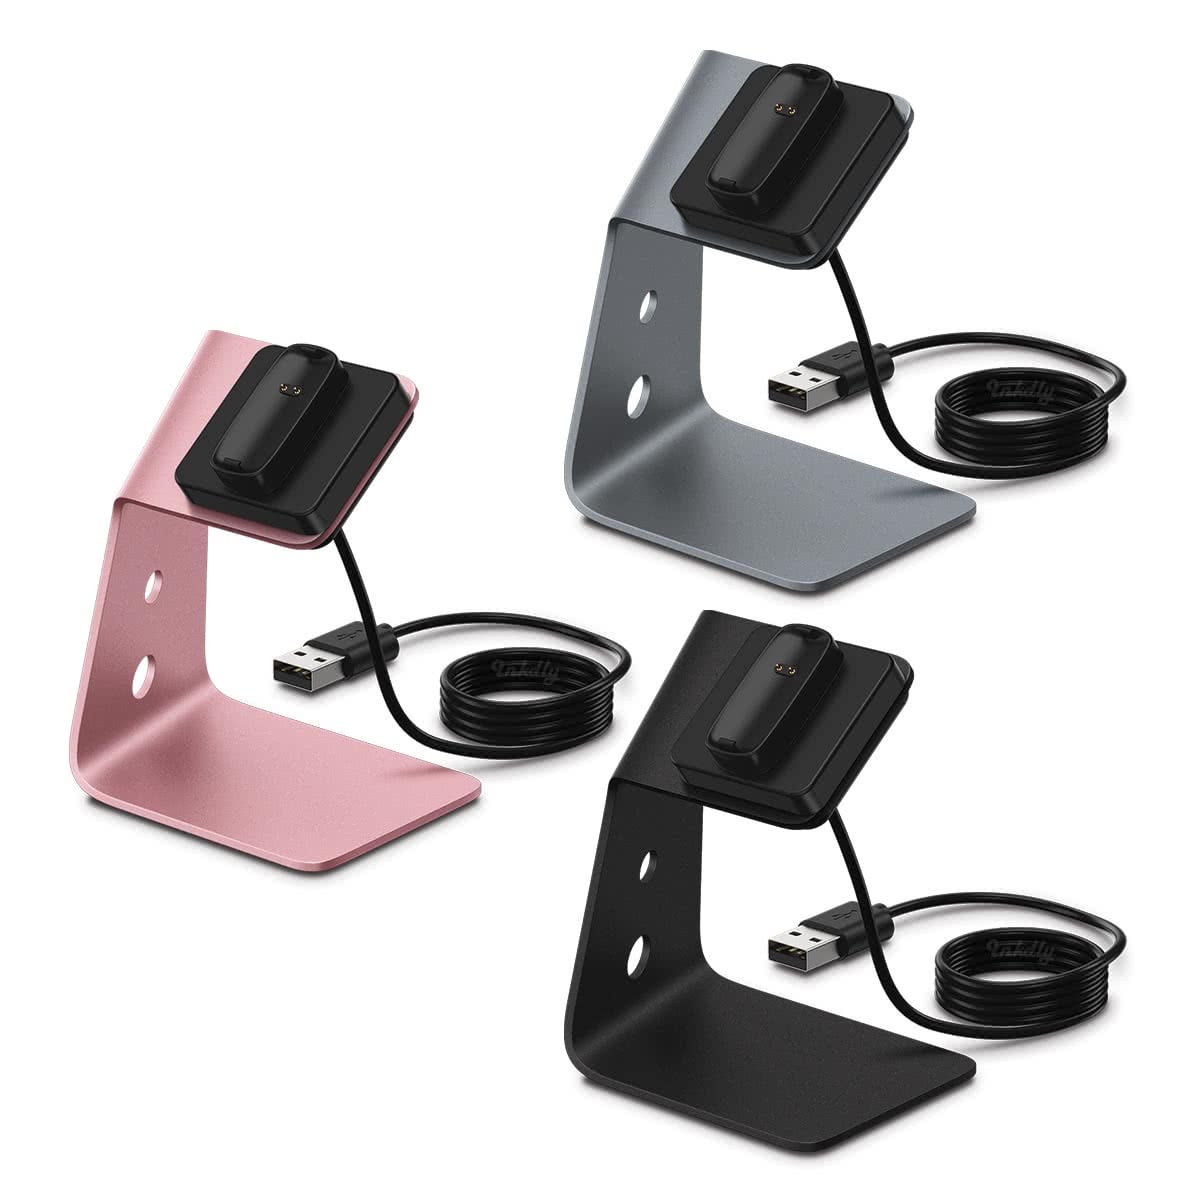 Refuel Fitbit Inspire 2 & Fitbit Ace 3 Charger Stand   